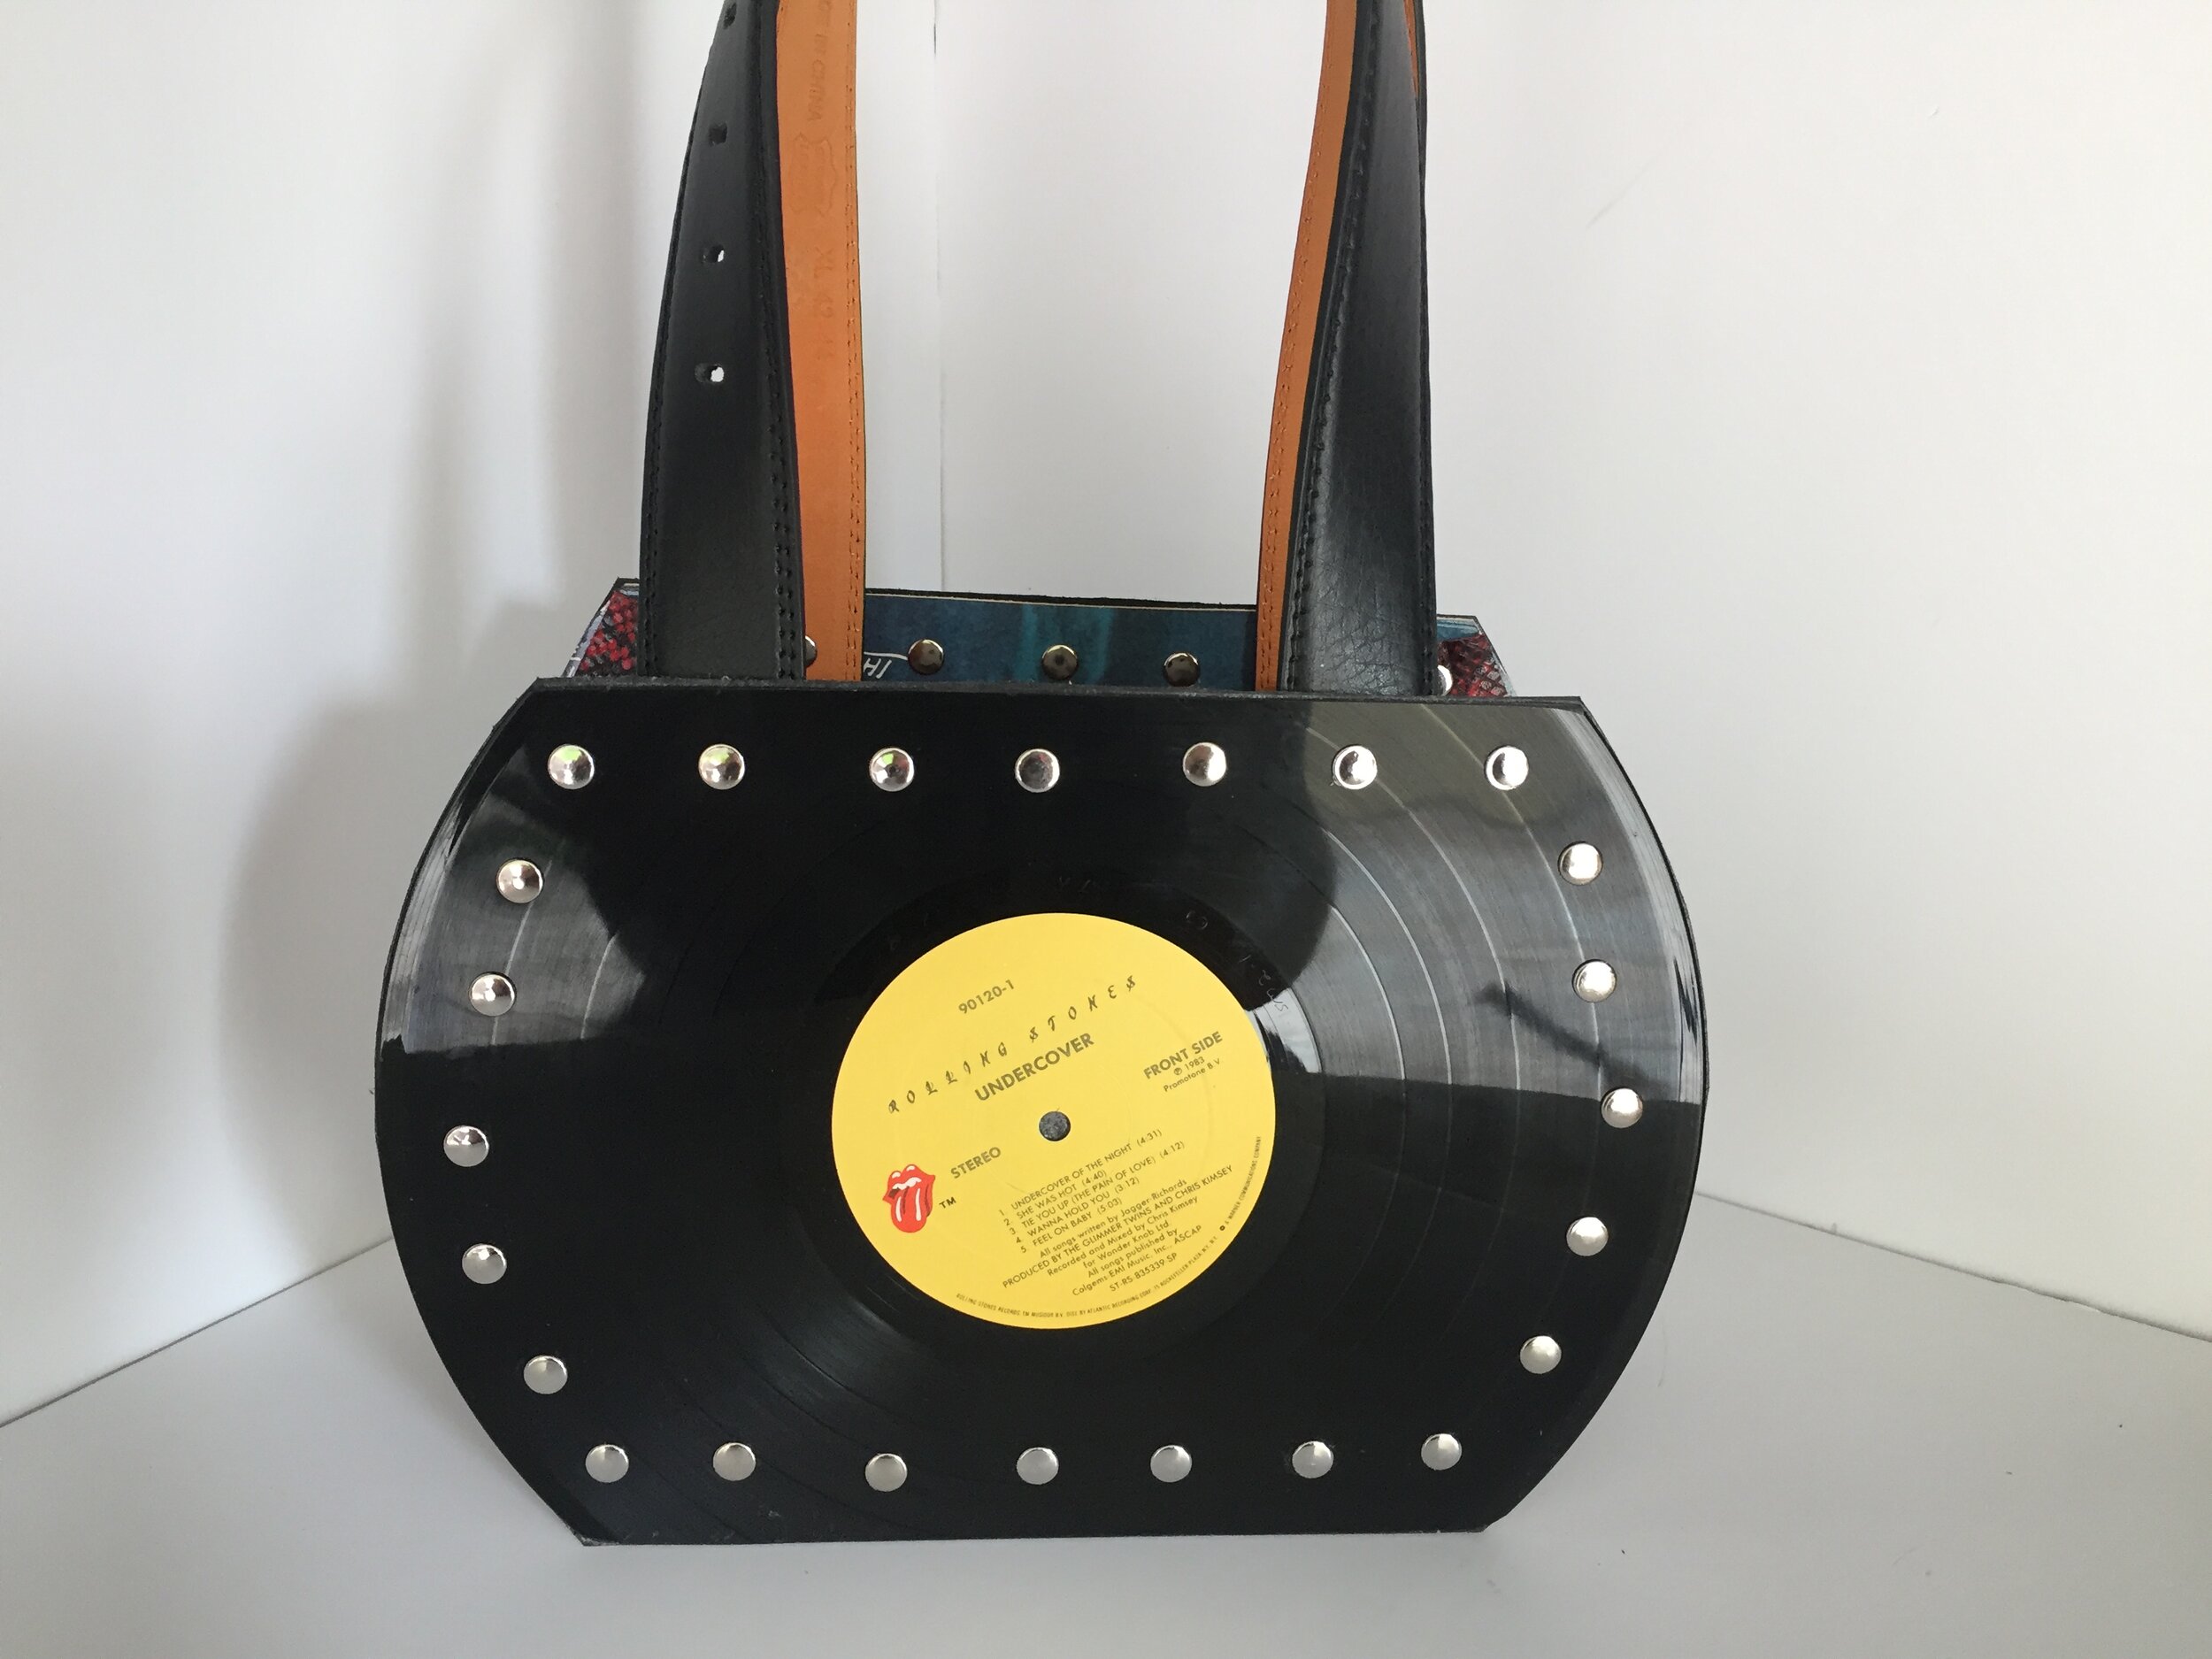 Rolling Stones “Undercover” vinyl record purse — She’s A Rainbow